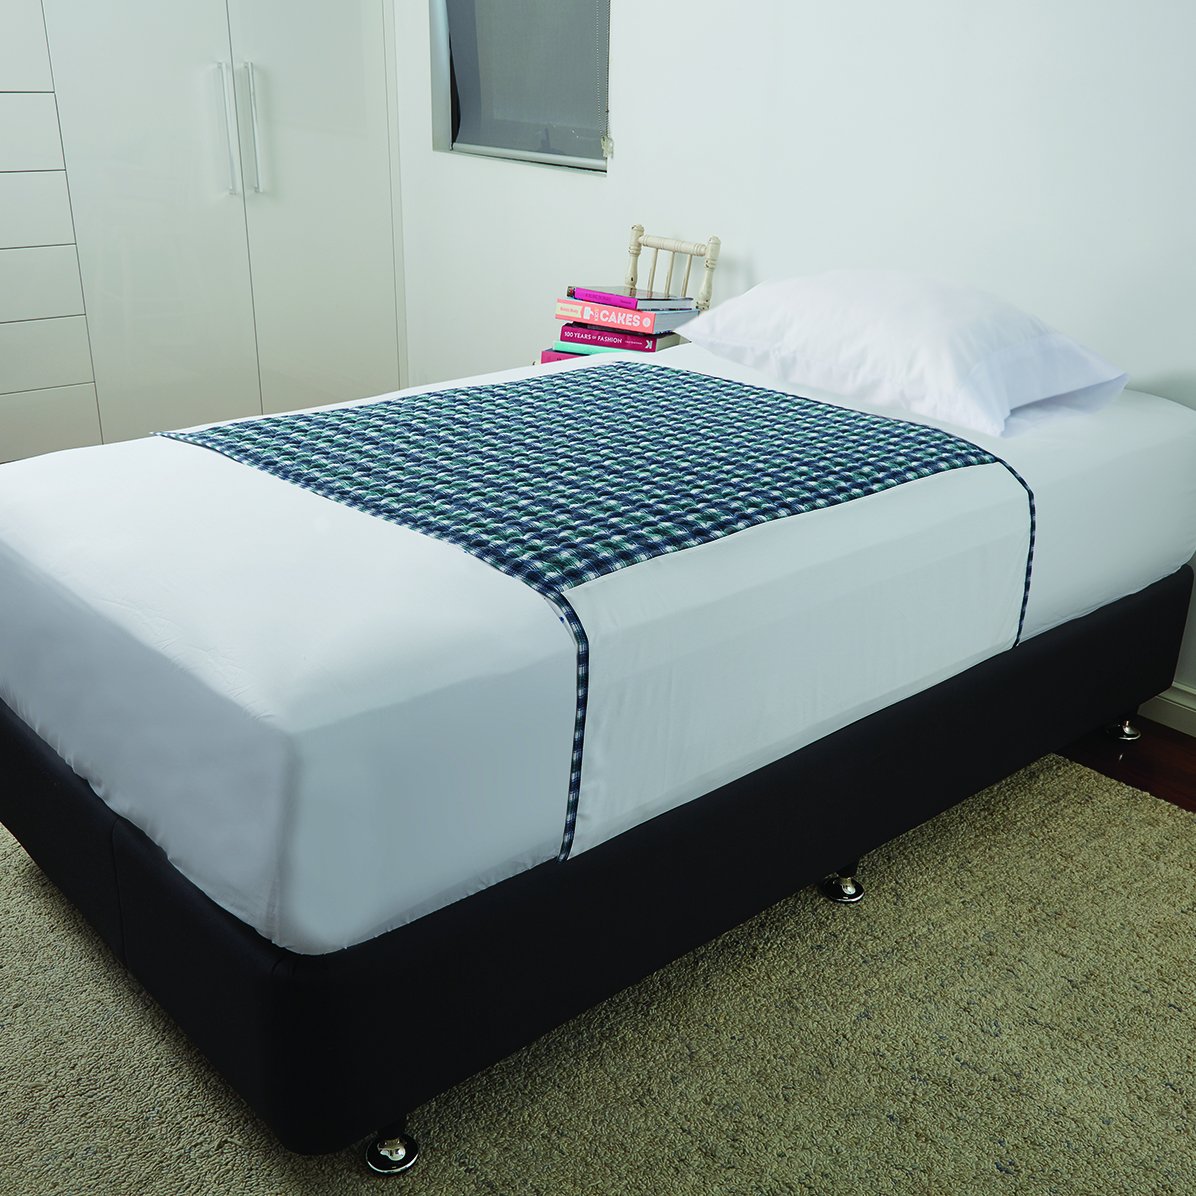 Buddies Bed Pad with Tuckins - Linen Saver 90 x 90cm - GMobility